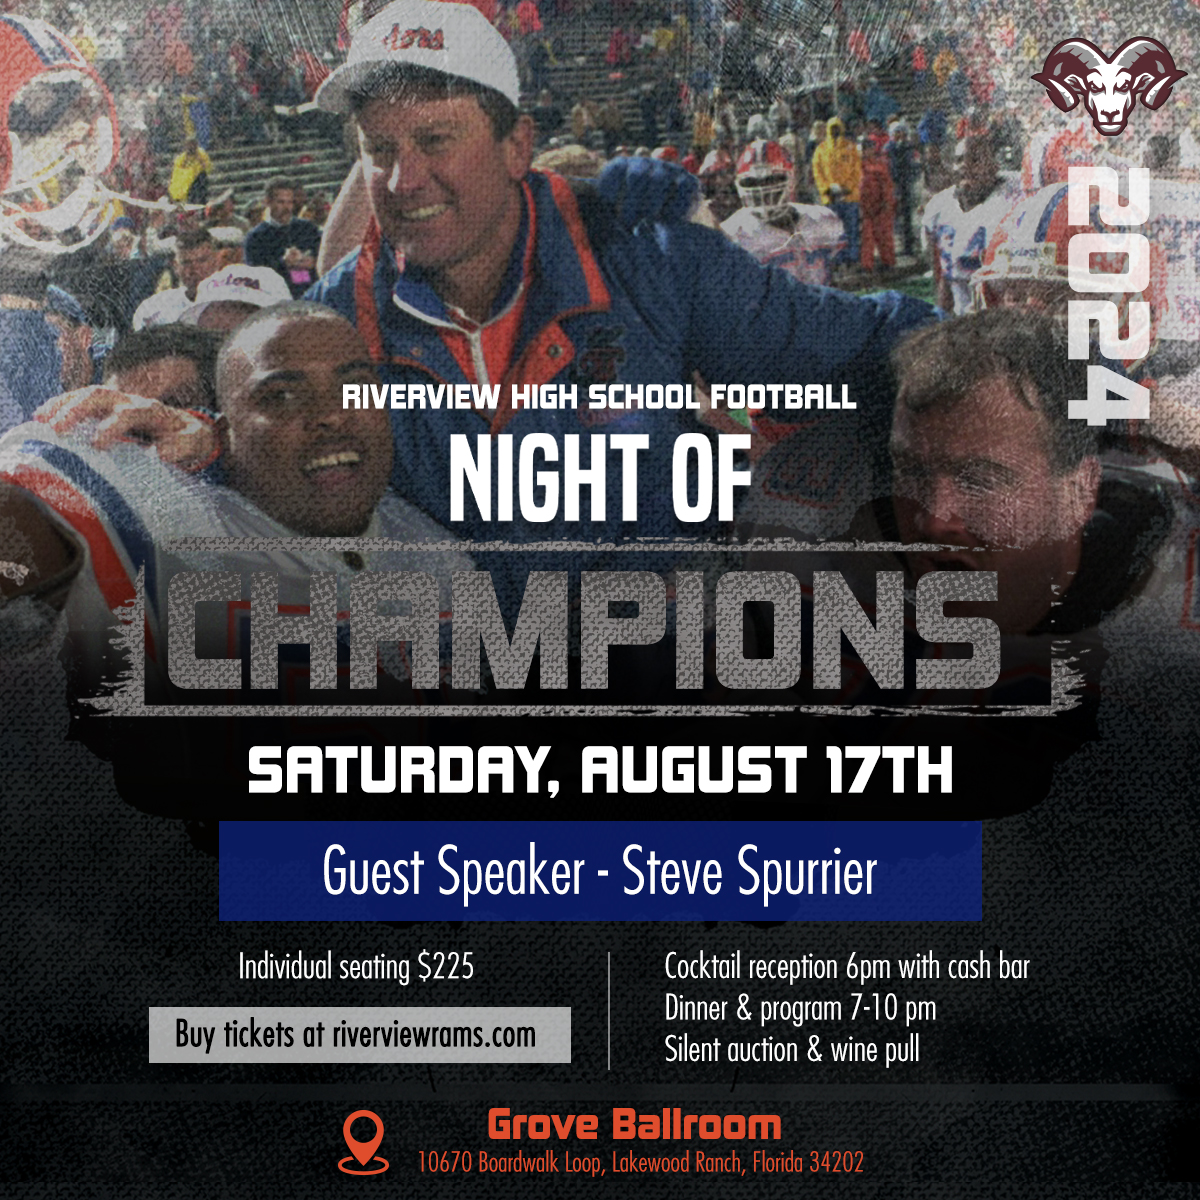 Join us for an unforgettable night with our Night of Champions guest speaker, Steve Spurrier! August 17 at Grove Ballroom in Lakewood Ranch 6pm Cash bar | 7pm Dinner and program | Silent auction and wine pull Tickets: riverviewrams.com/product/night-… Sponsorships: riverviewrams.com/product/night-…